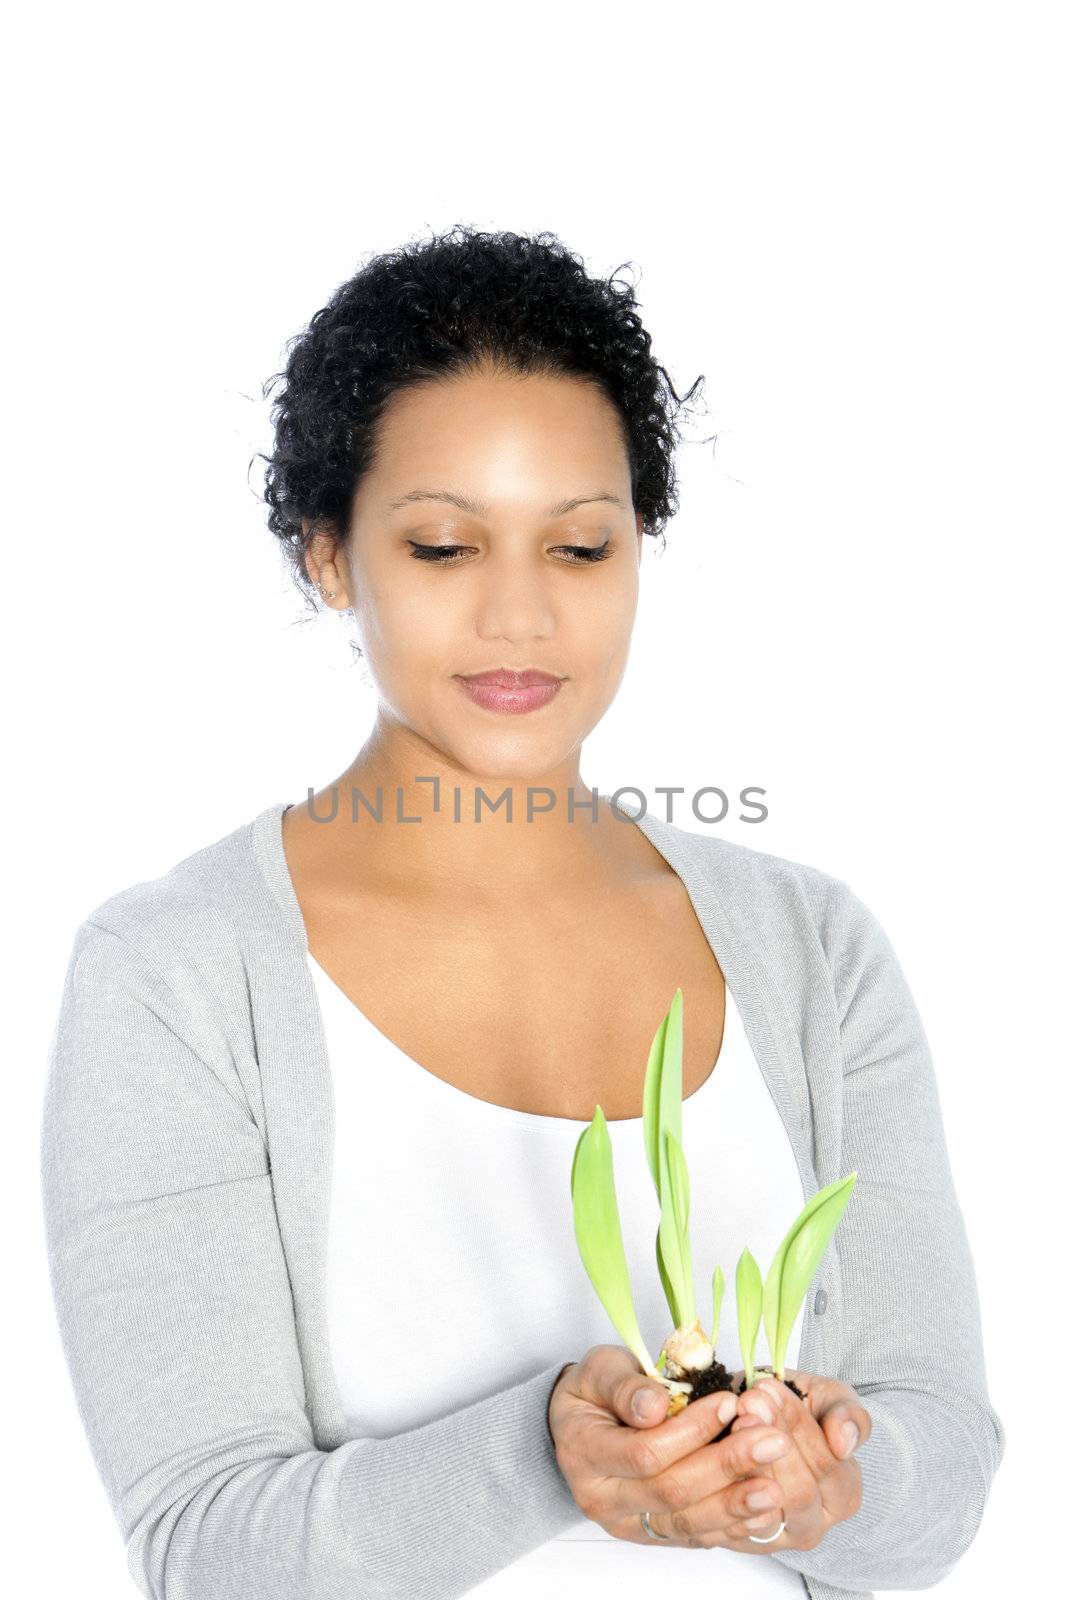 Afro-American young woman holding a plant, on white background